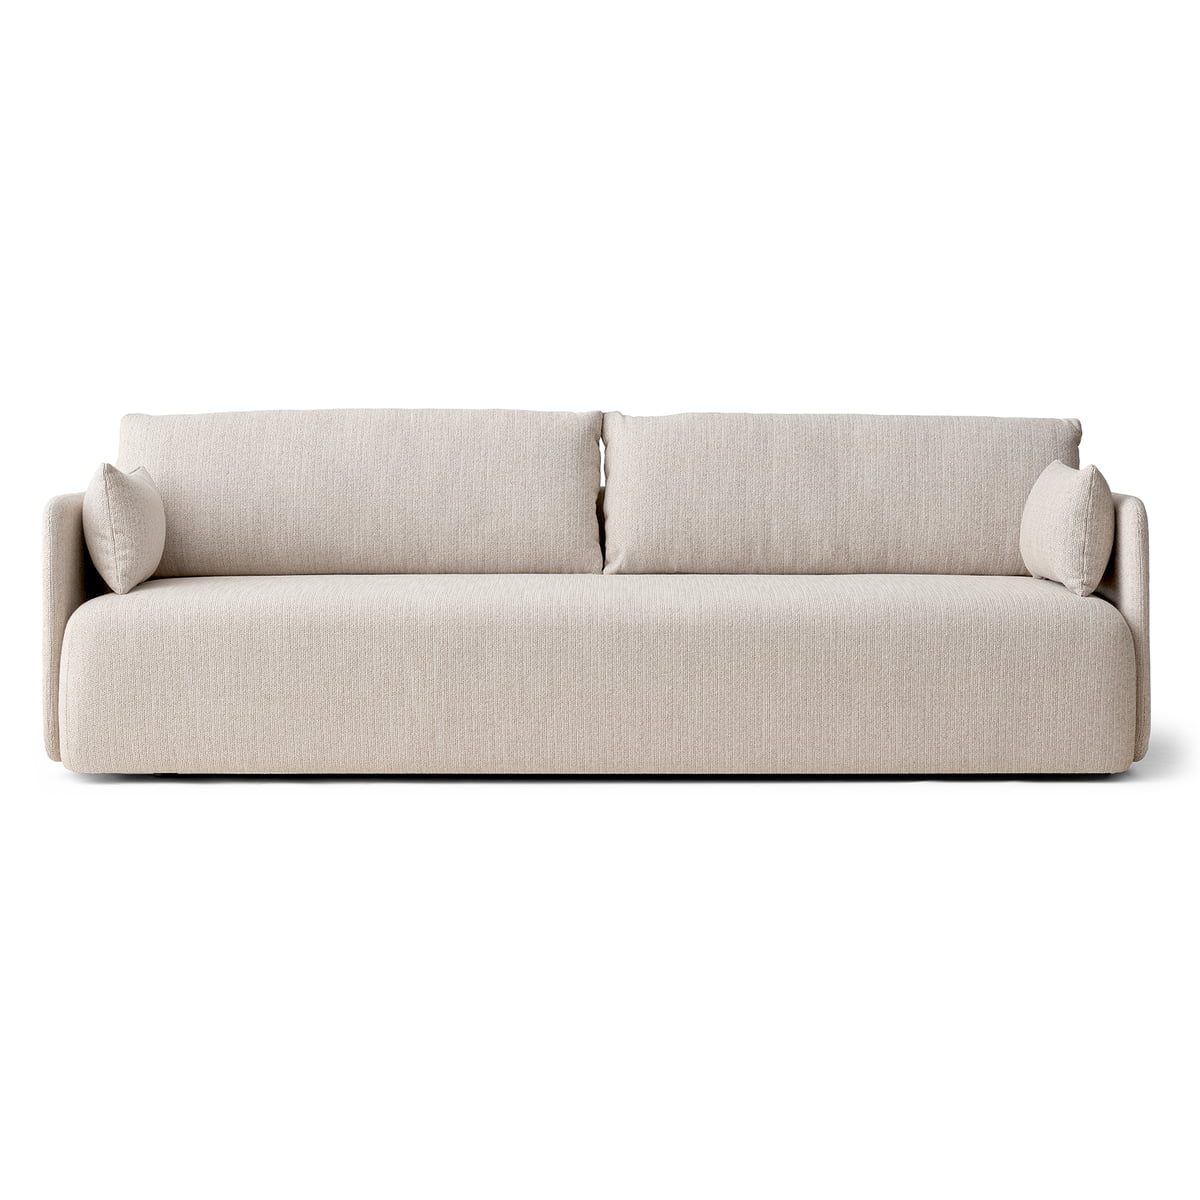 Get married delivery None sofa 20 sitzer beige warrant participate ...